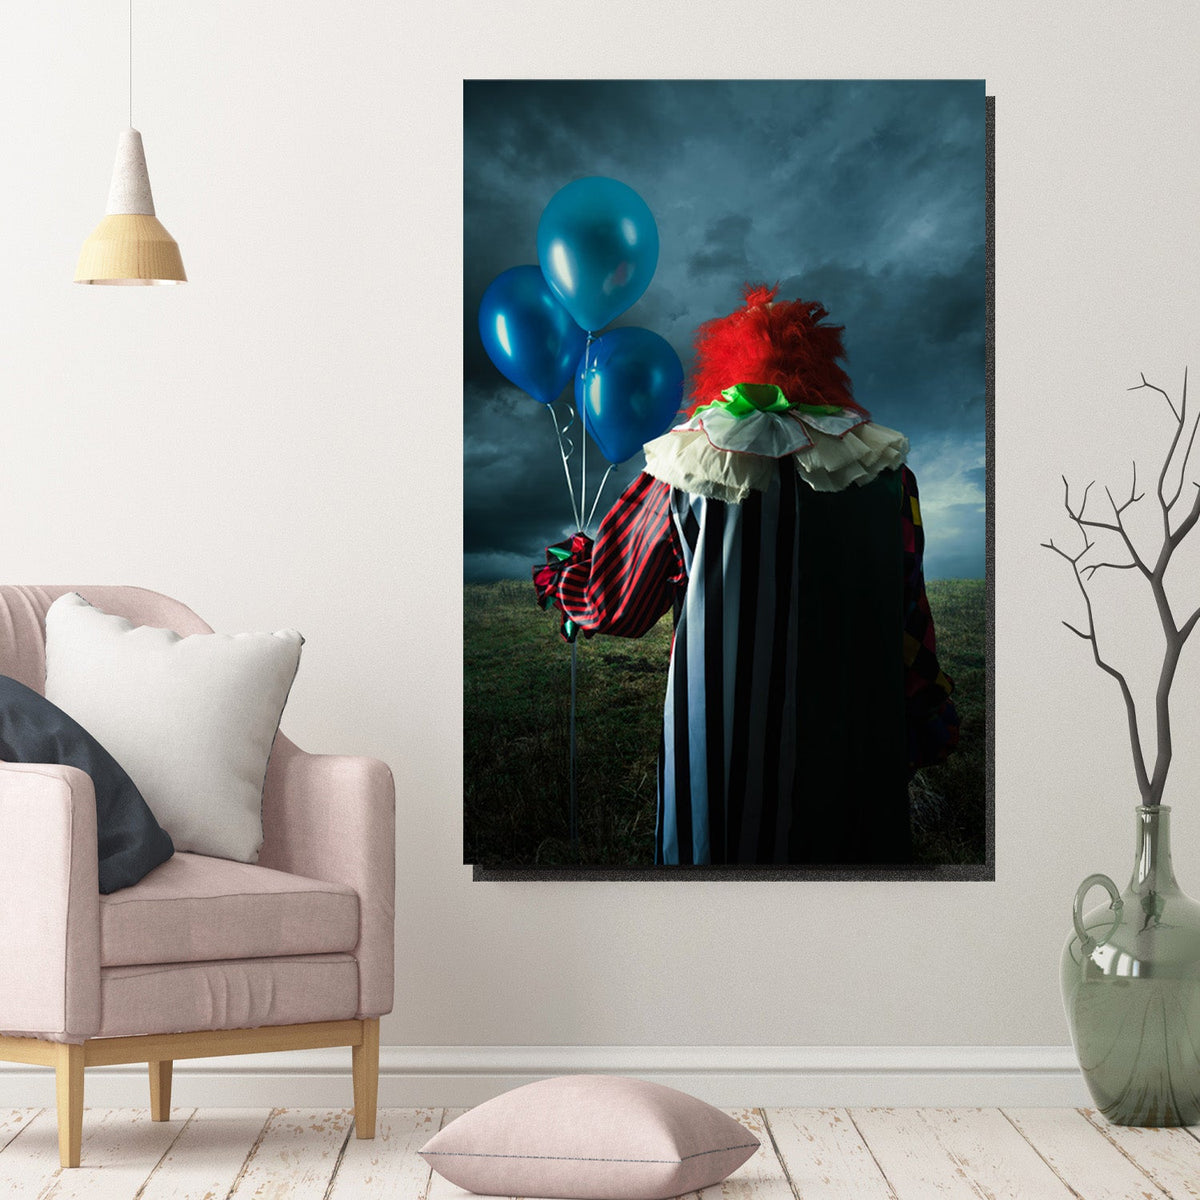 https://cdn.shopify.com/s/files/1/0387/9986/8044/products/ScaryClownCanvasArtprintStretched-4.jpg